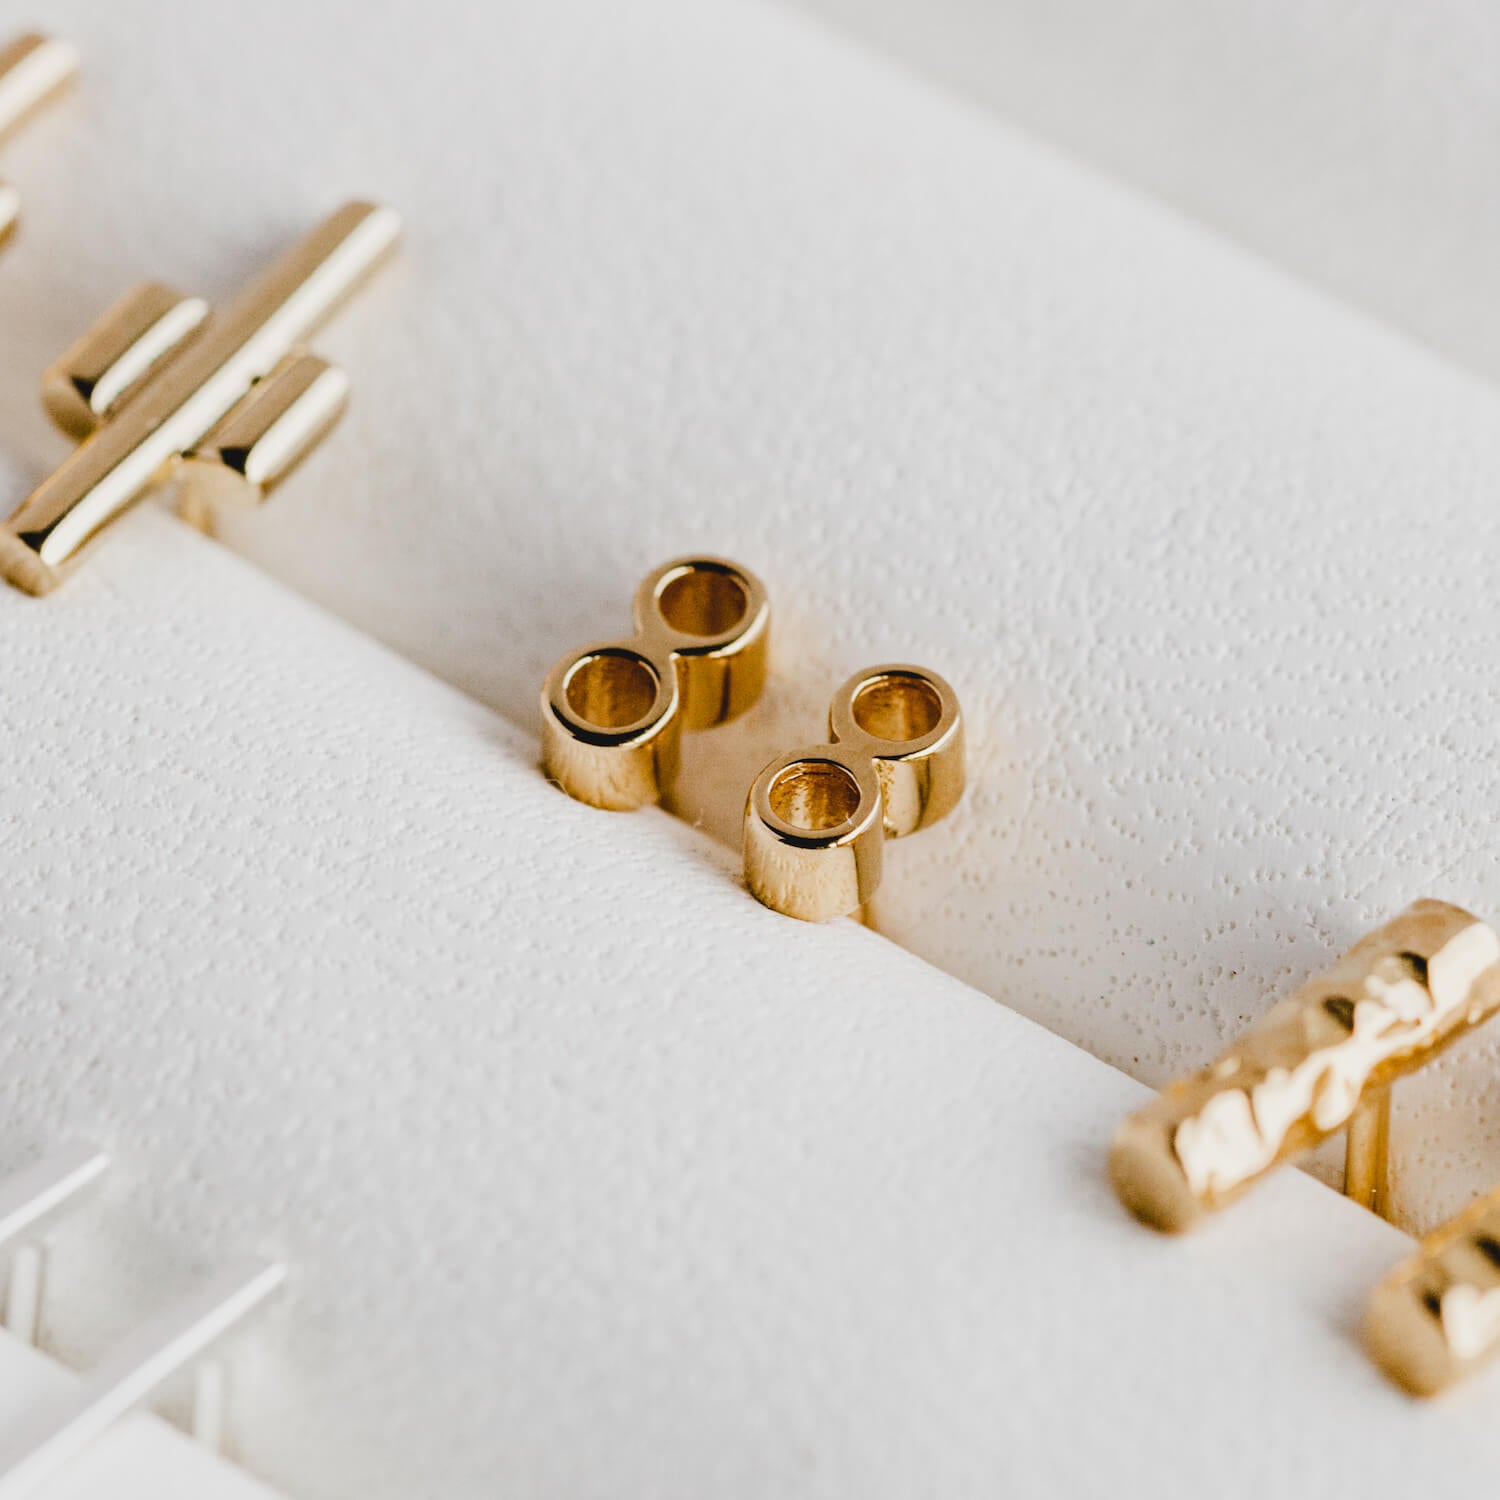 Close up of Matthew Calvin gold vermeil tiny tube earrings, with other gold earrings surrounding